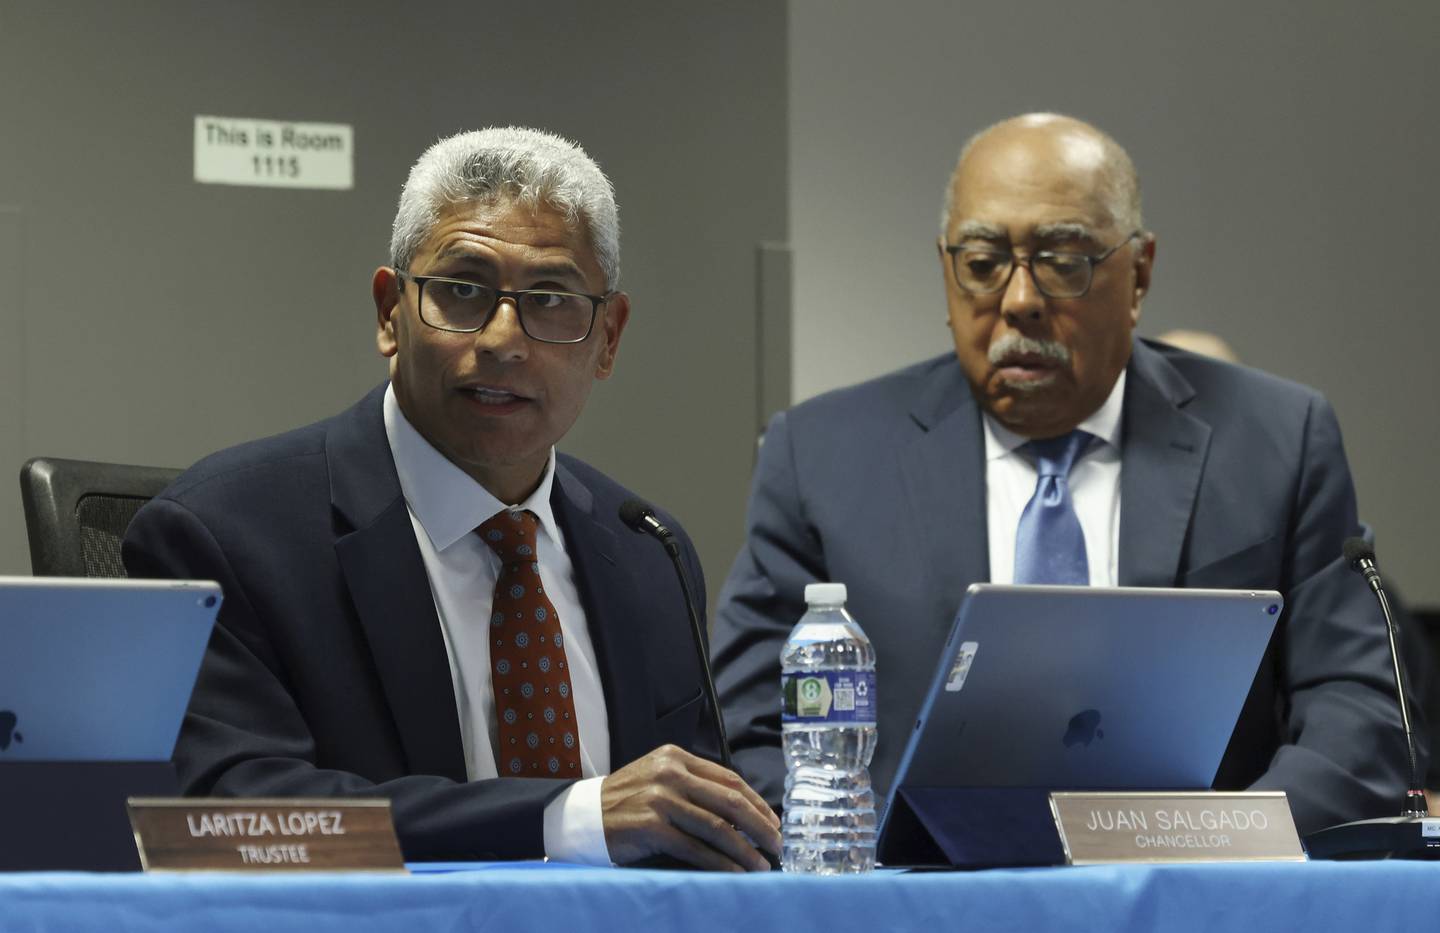 City Colleges of Chicago Chancellor Juan Salgado, left, addresses attendees at a board meeting as Chairperson Walter Massey, right, listens at Harold Washington College in Chicago on Oct. 6, 2022. 